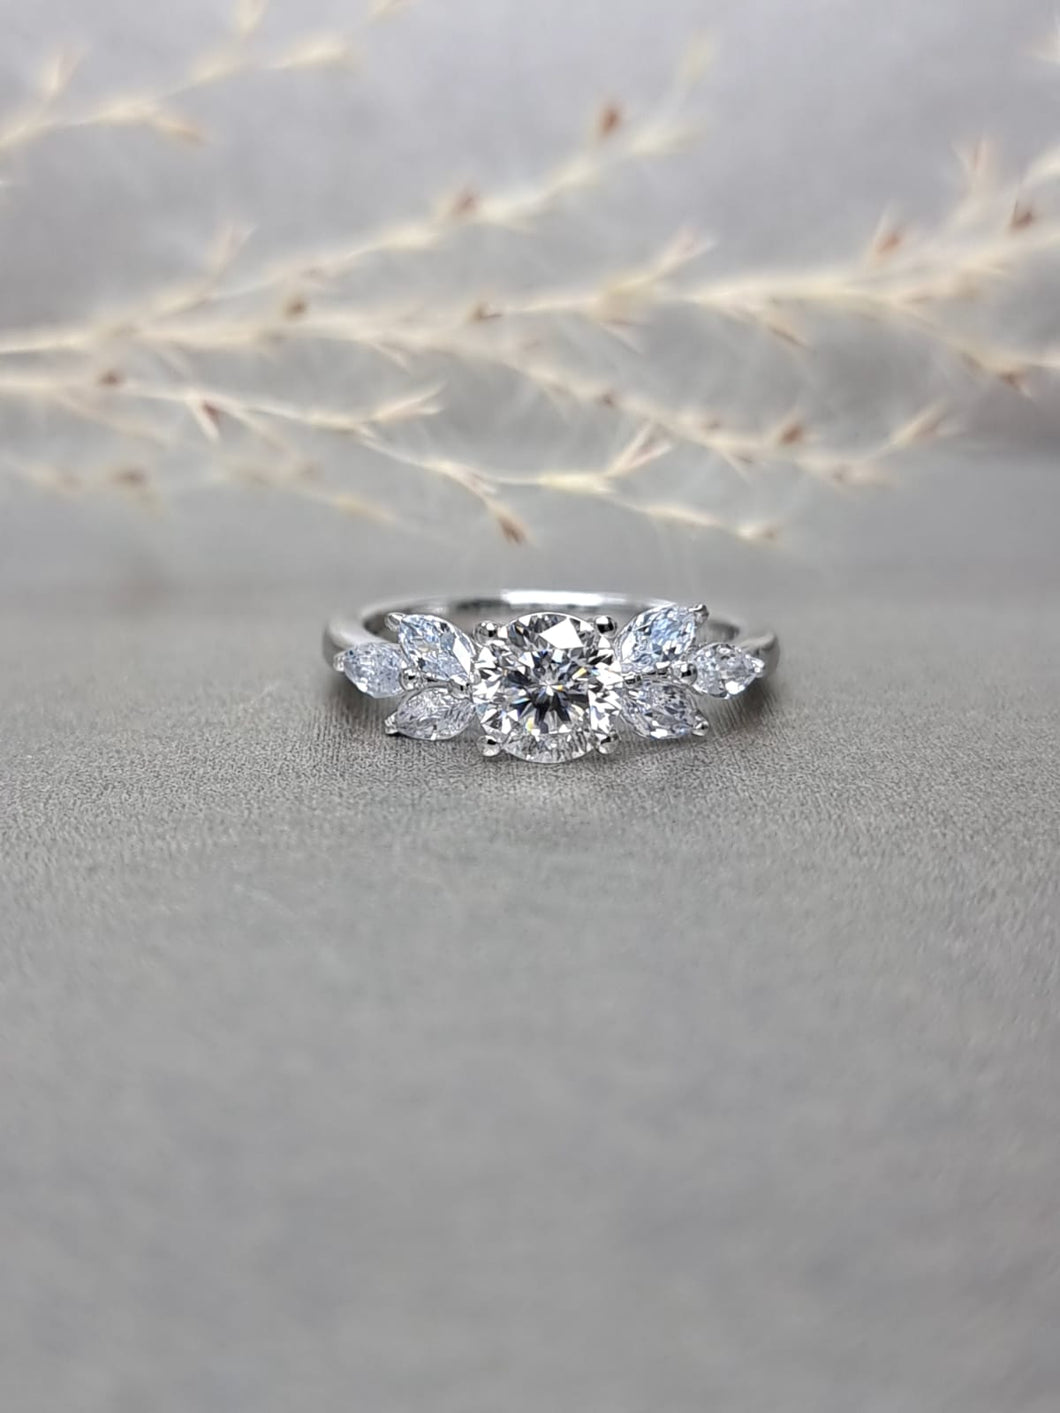 1.00ct Round Brilliant Cut Moissanite Diamond With Side Stone Marquise Cut Ring